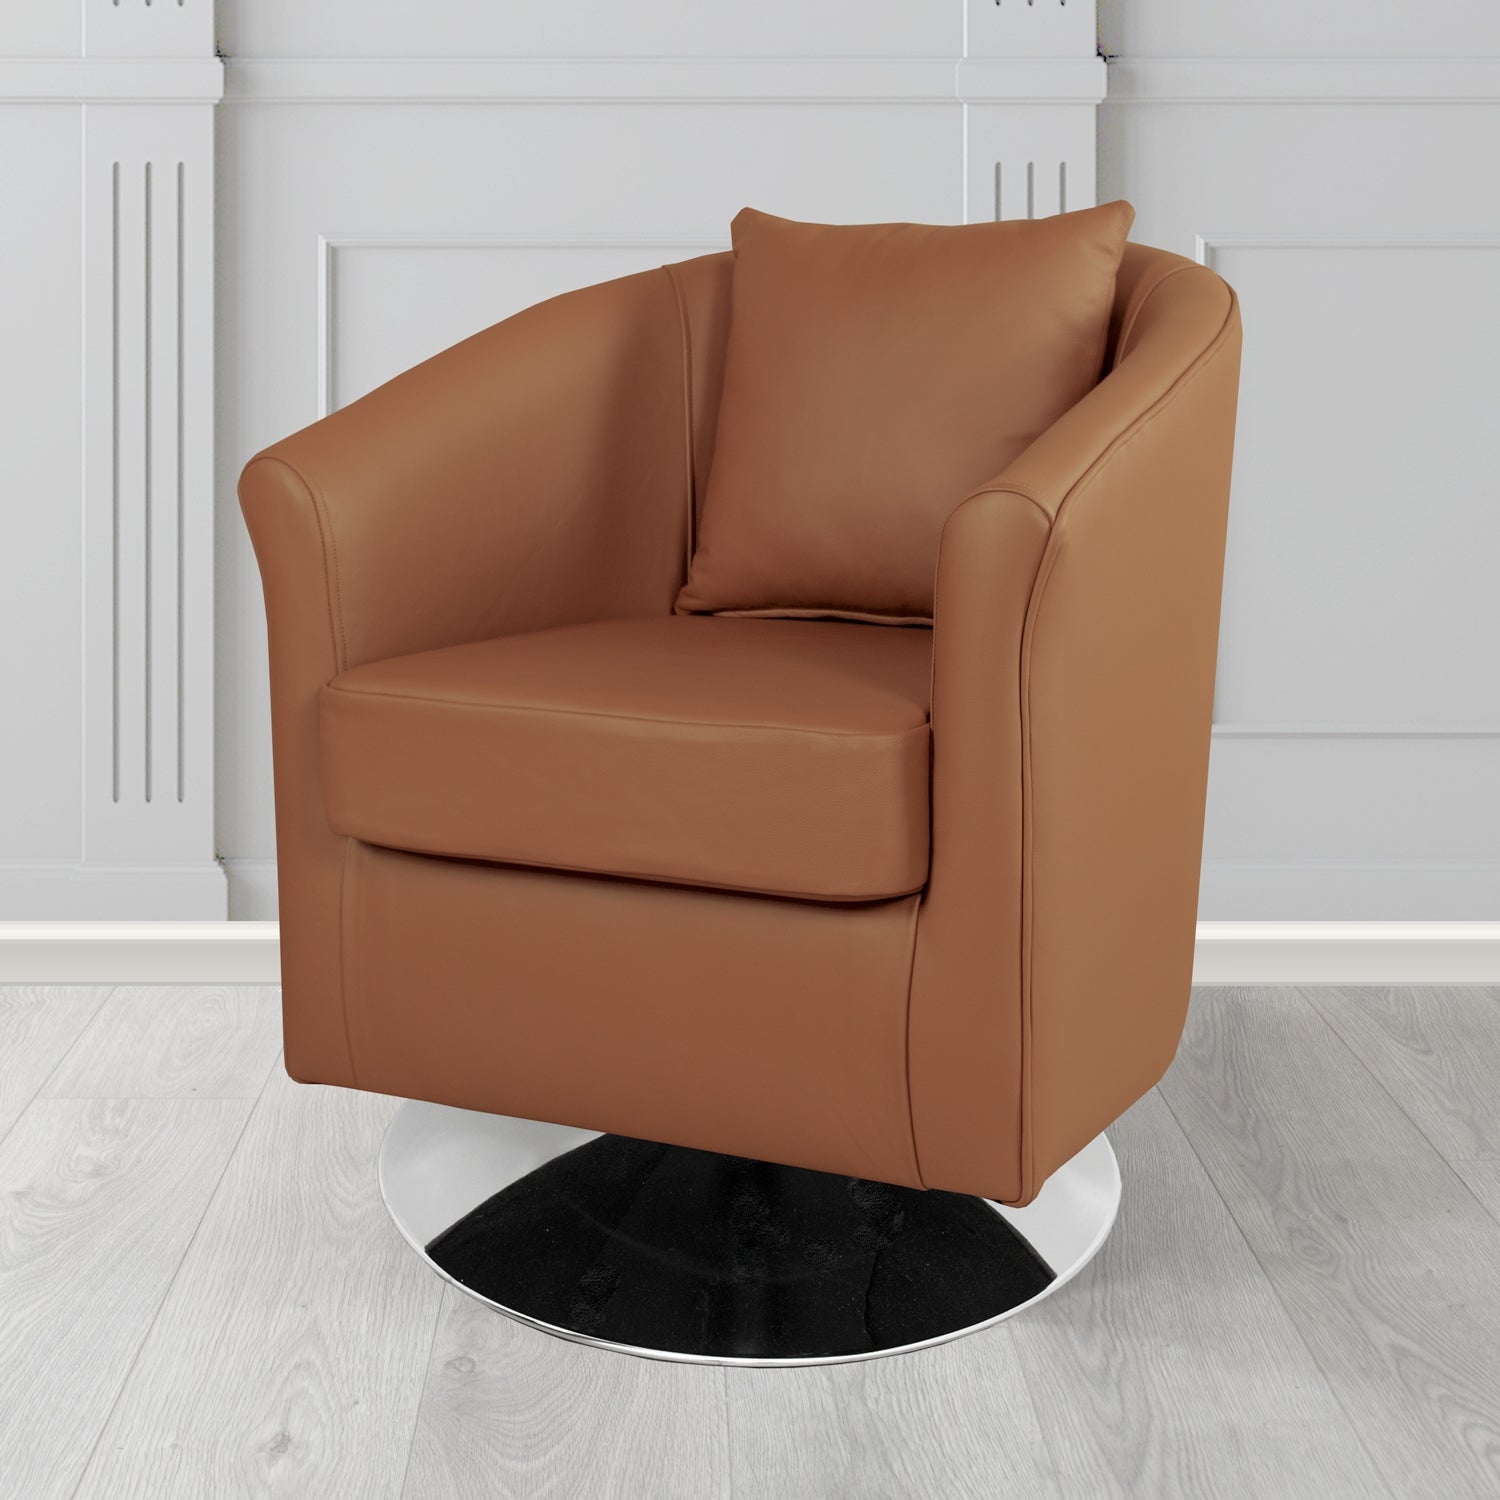 St Tropez Swivel Tub Chair in Contempo Castagna Crib 5 Genuine Leather with Scatter Cushion